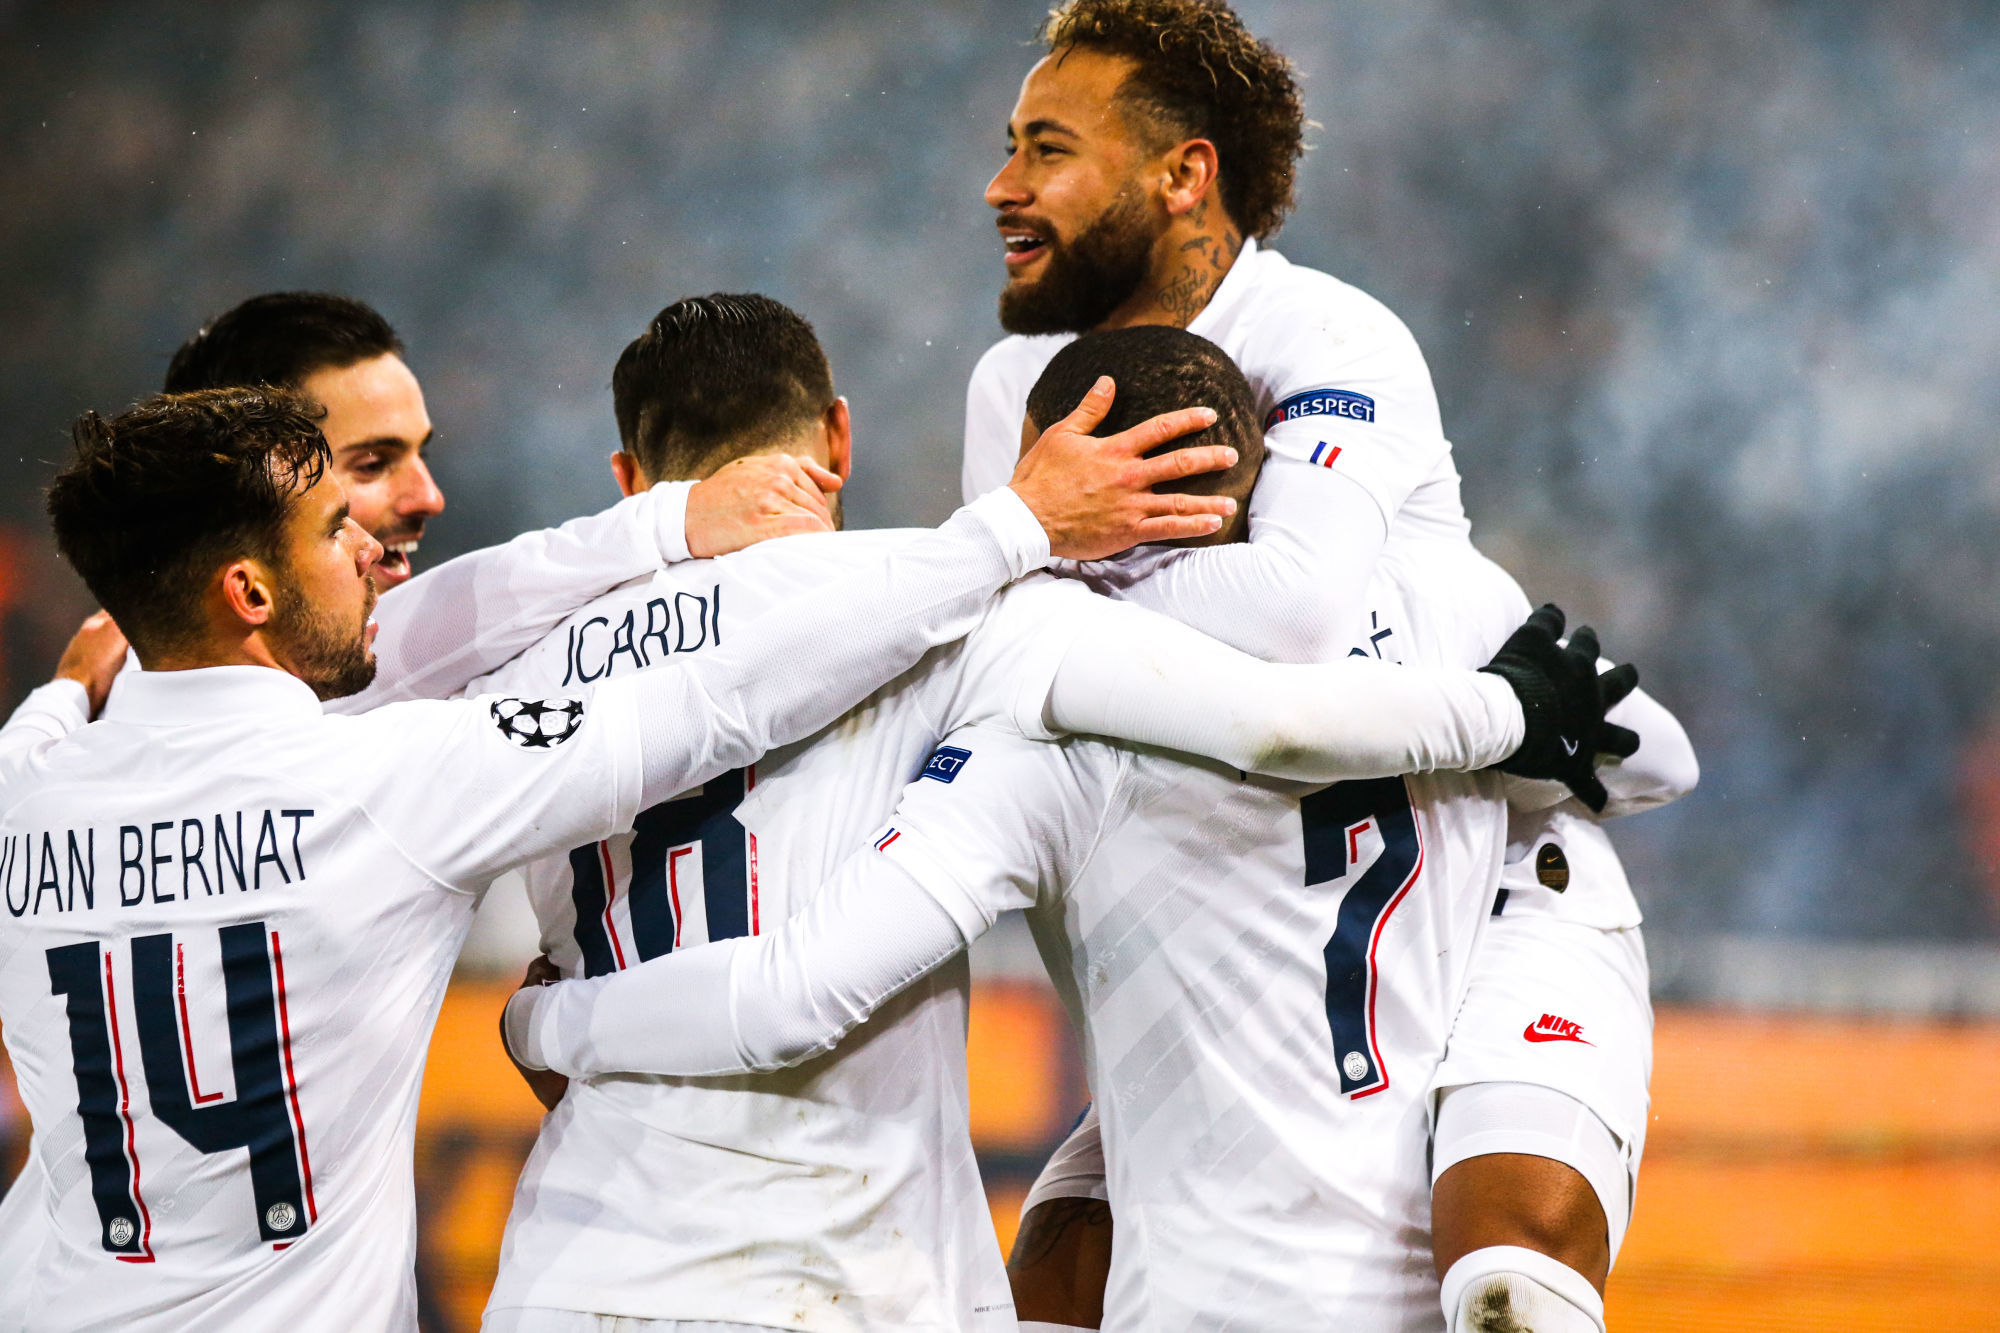 Team PSG celebrate his goal during the Champions League match between Paris and Galatasaray at Parc des Princes on December 11, 2019 in Paris, France. (Photo by Johnny Fidelin/Icon Sport) - NEYMAR JR - Mauro ICARDI - Pablo SARABIA - Kylian MBAPPE - Juan BERNAT - Parc des Princes - Paris (France)